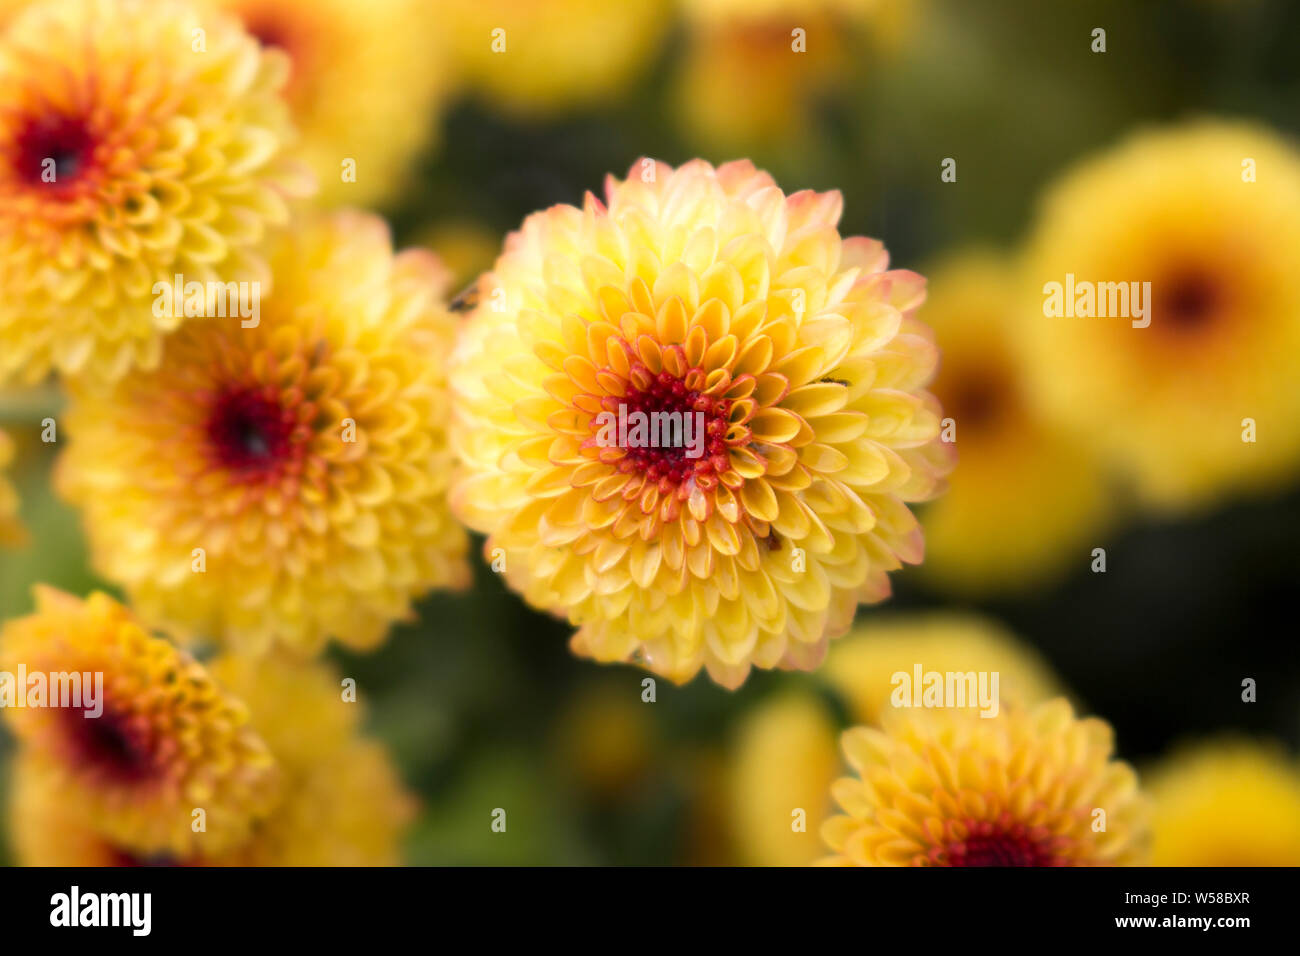 Close up of a single Lollipop Yellow Chrysanthemum flower in full bloom with water drops in center. Blurry background. Stock Photo